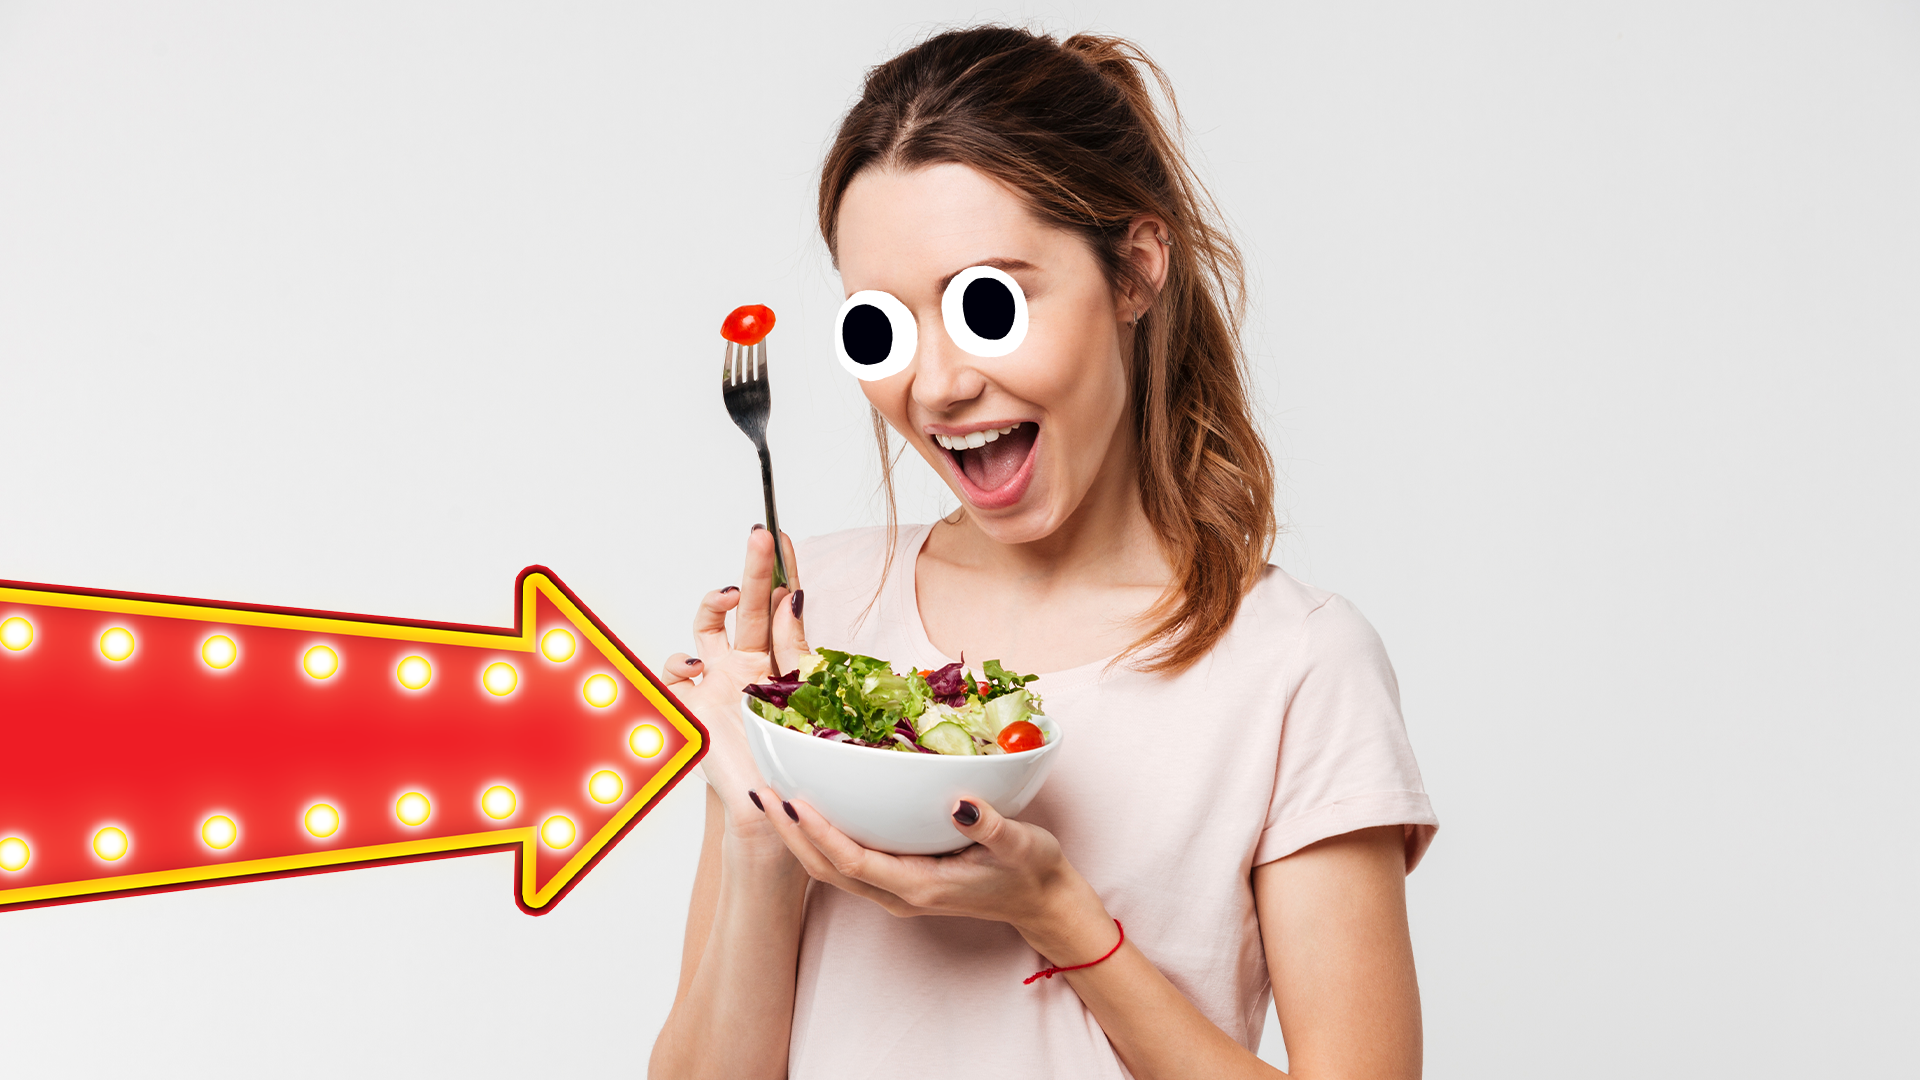 Smiling woman with salad and arrow